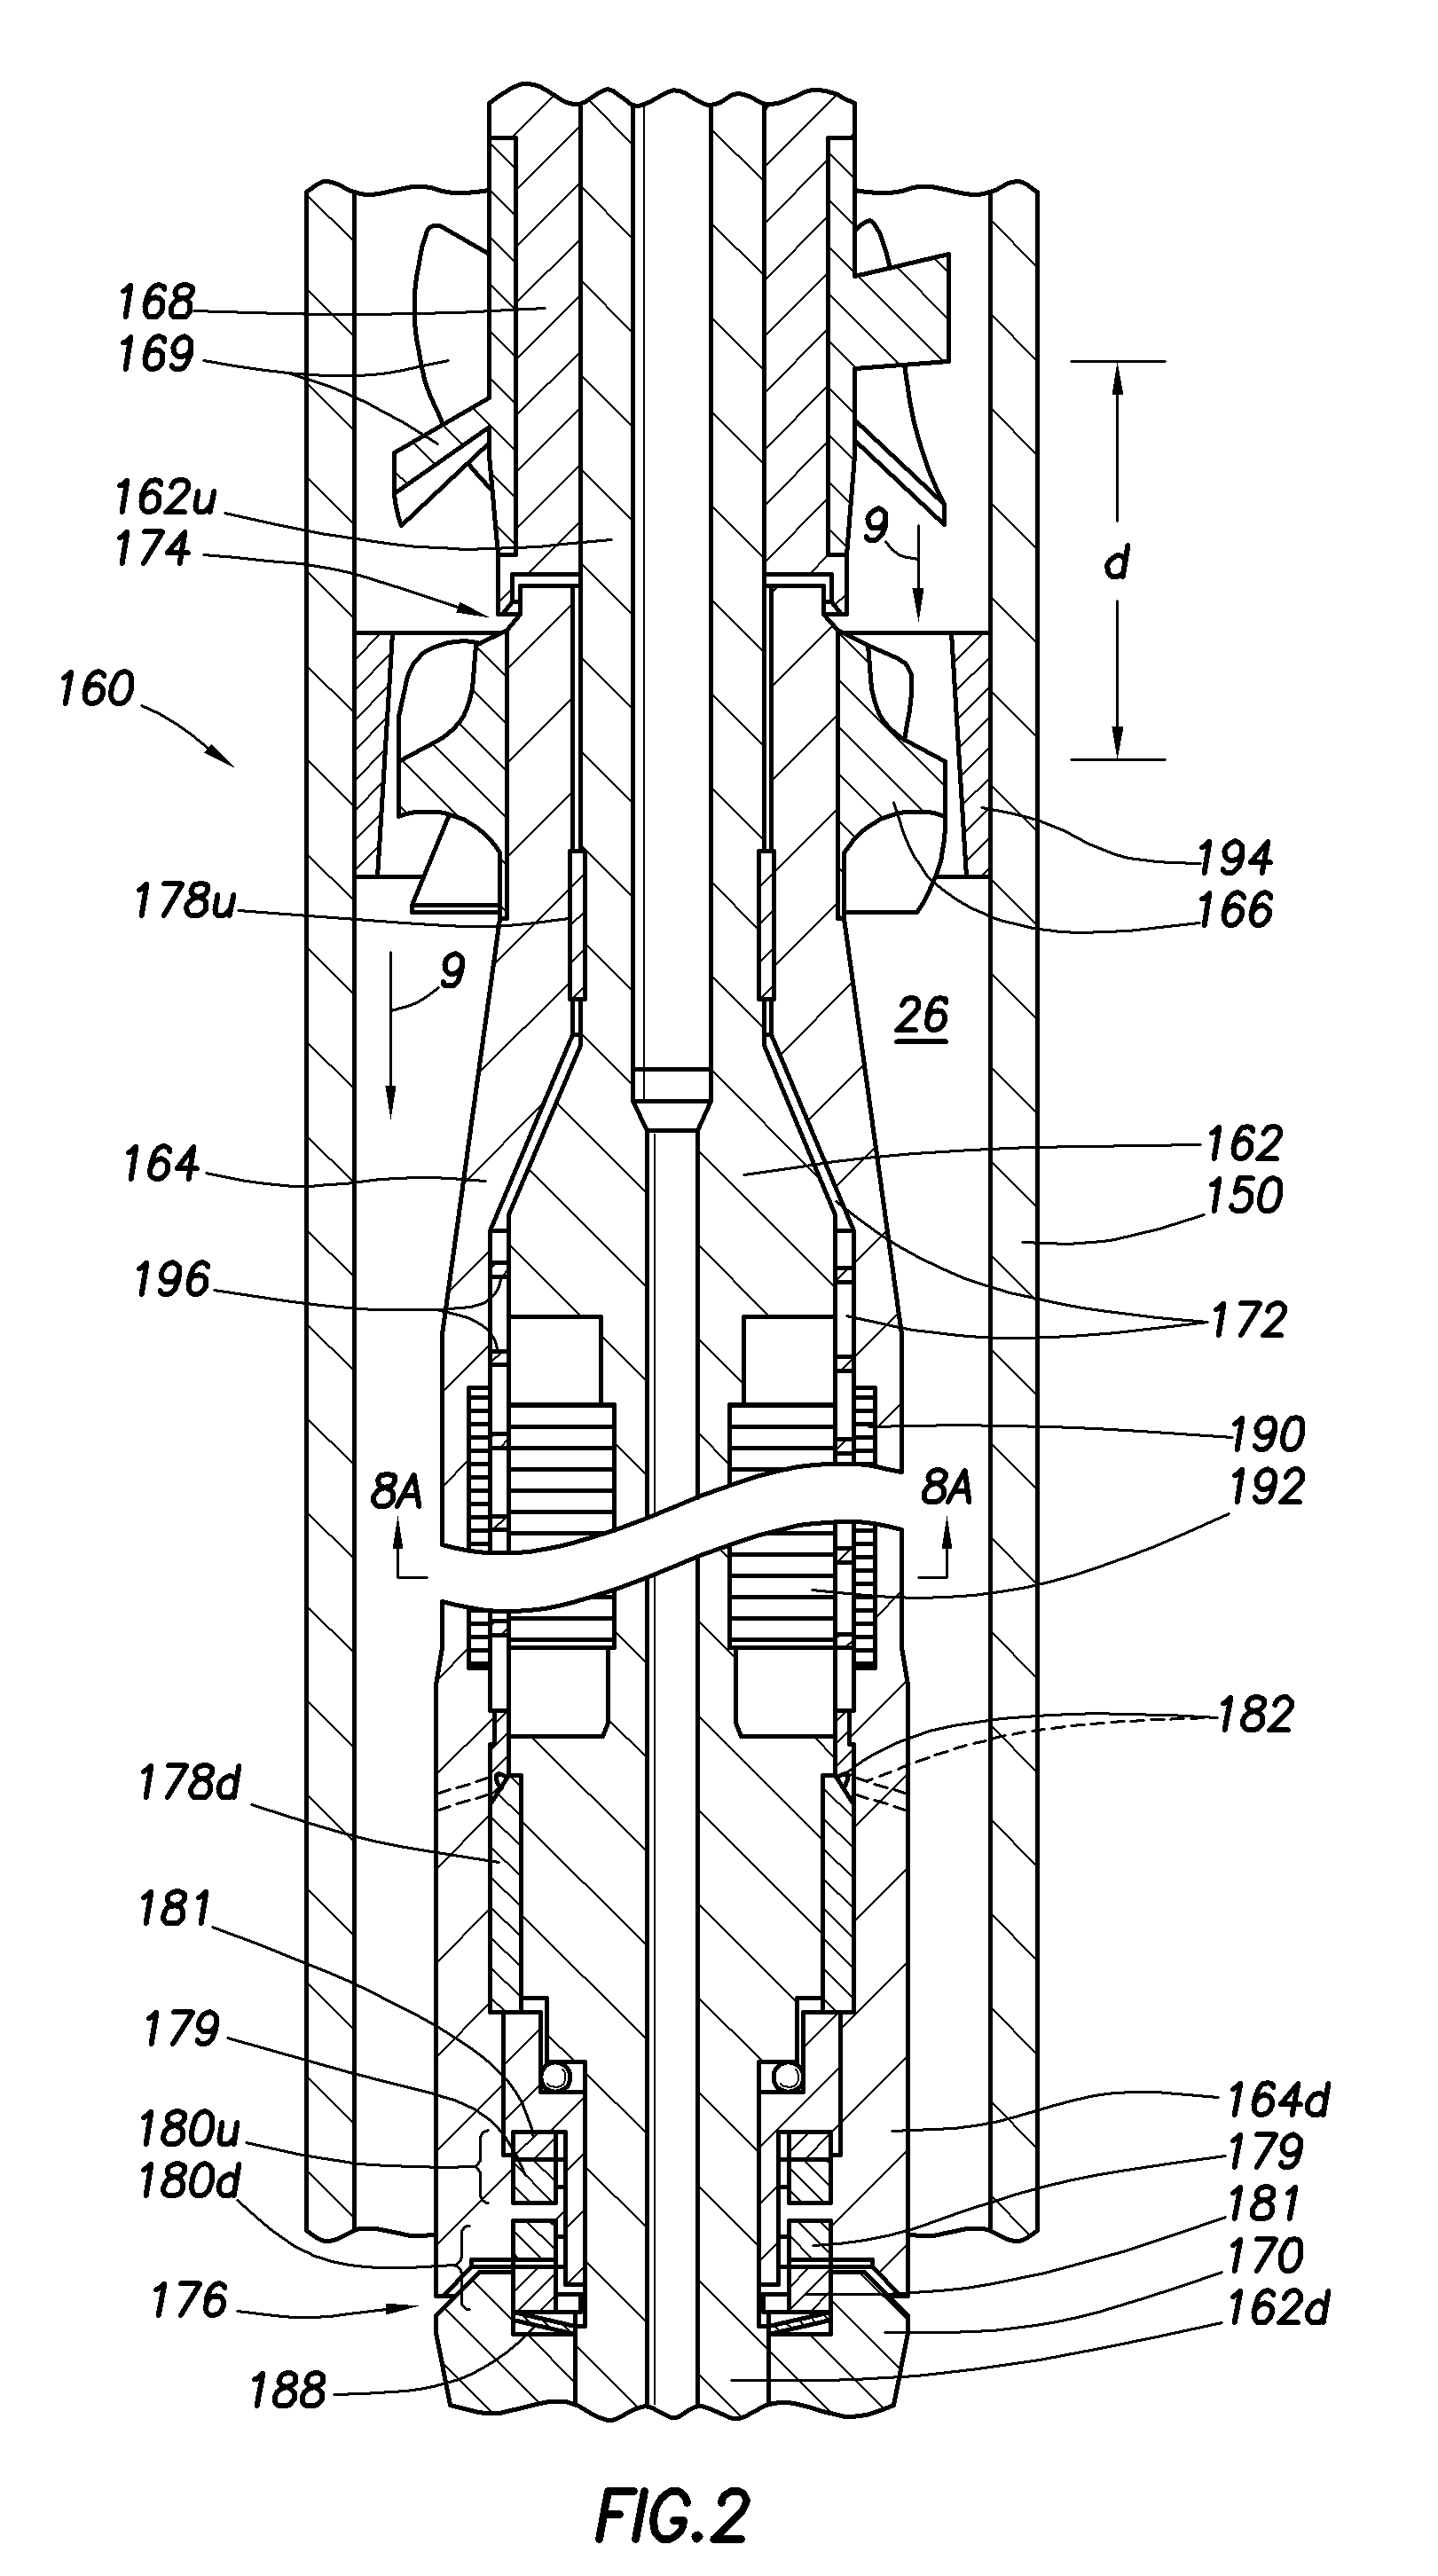 Apparatus and method for generating electrical power in a borehole